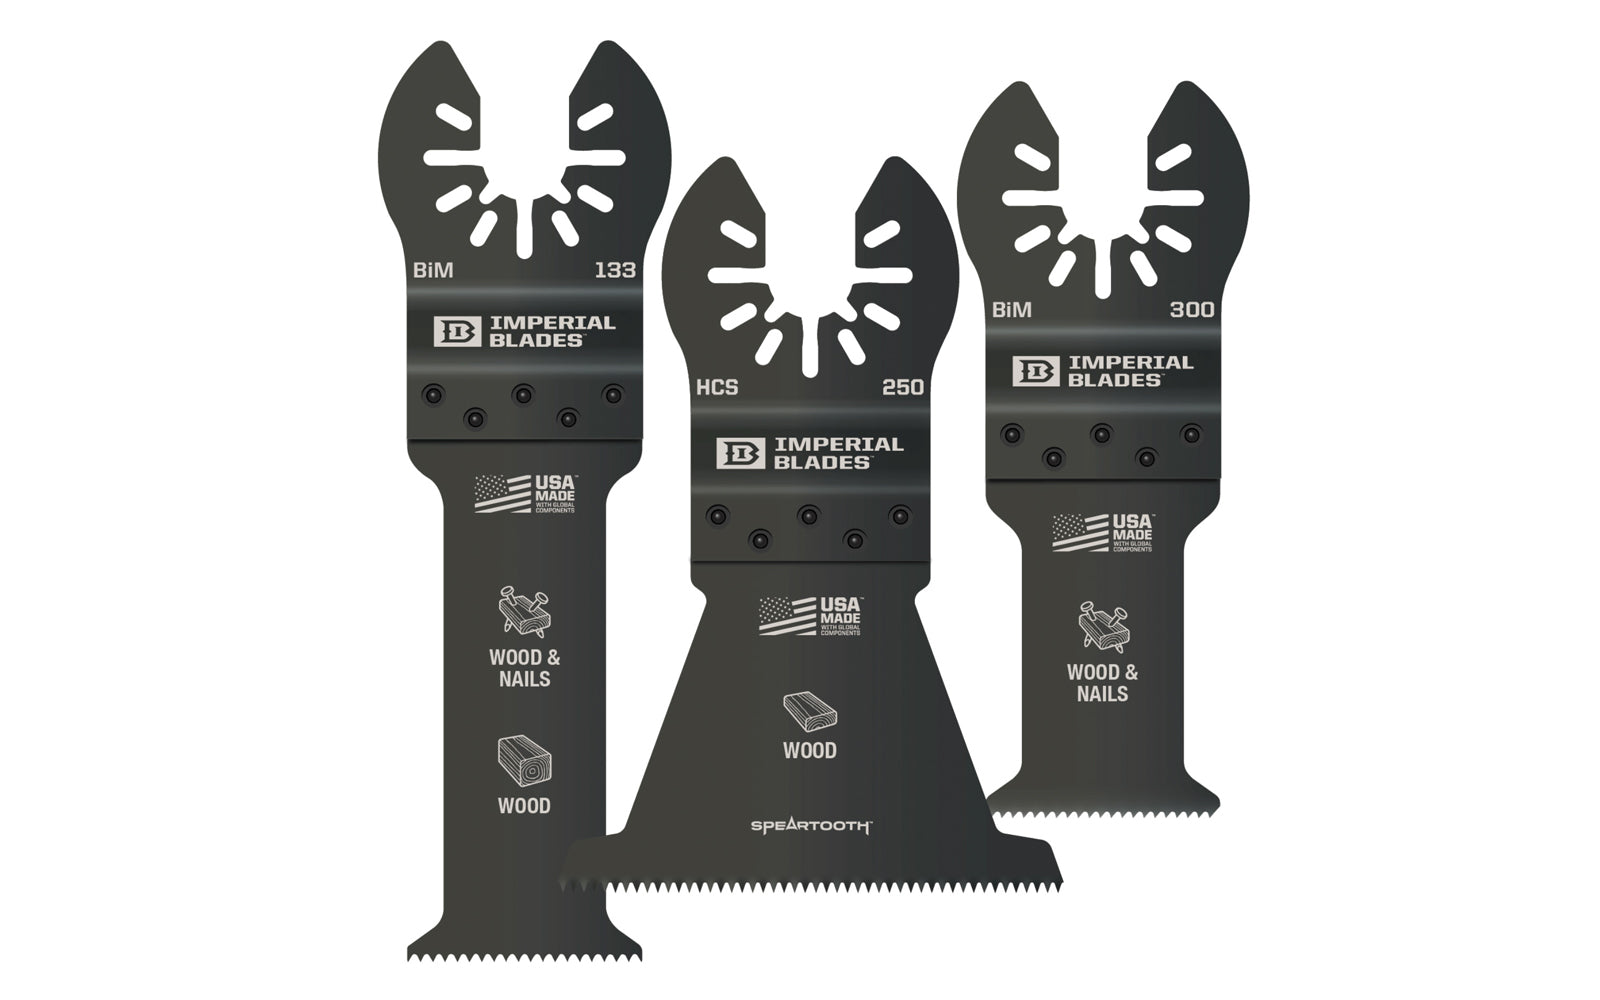 Imperial Blades Standard Wood Variety Pack. Recommended applications: Metal (Non-Ferrous), Wood & Nails, Copper Pipe, Hardwood, Wood, PVC, Drywall. 3 blades in pack.  Made in USA. 819846012401. Model IBOAV1-3